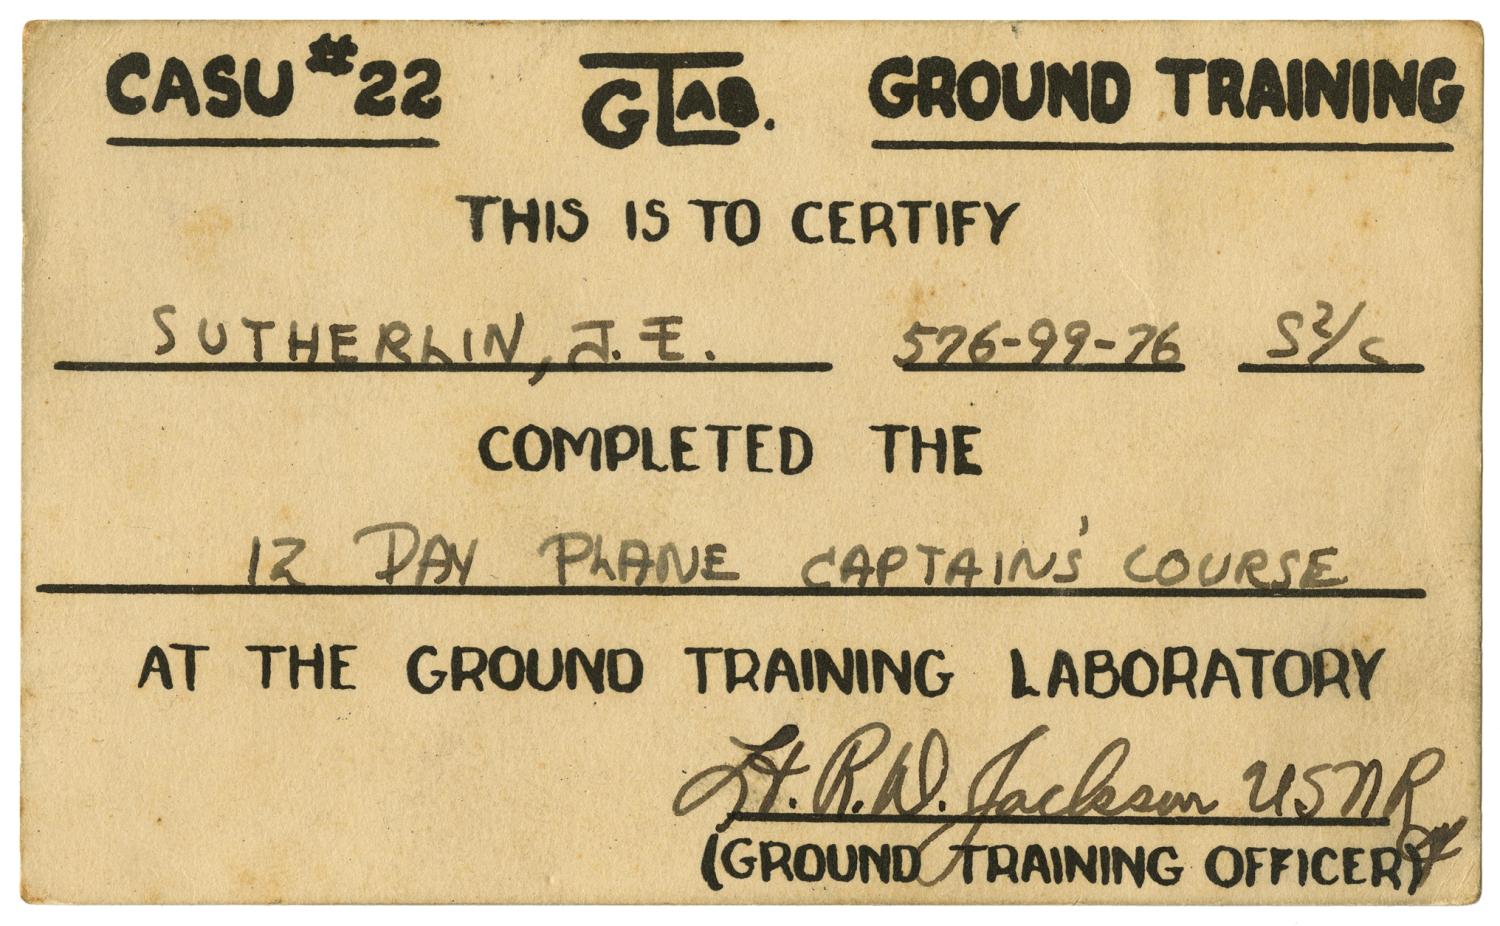 [CASU #22 GTAB Ground Training Certification Card for James E. Sutherlin]
                                                
                                                    [Sequence #]: 1 of 2
                                                